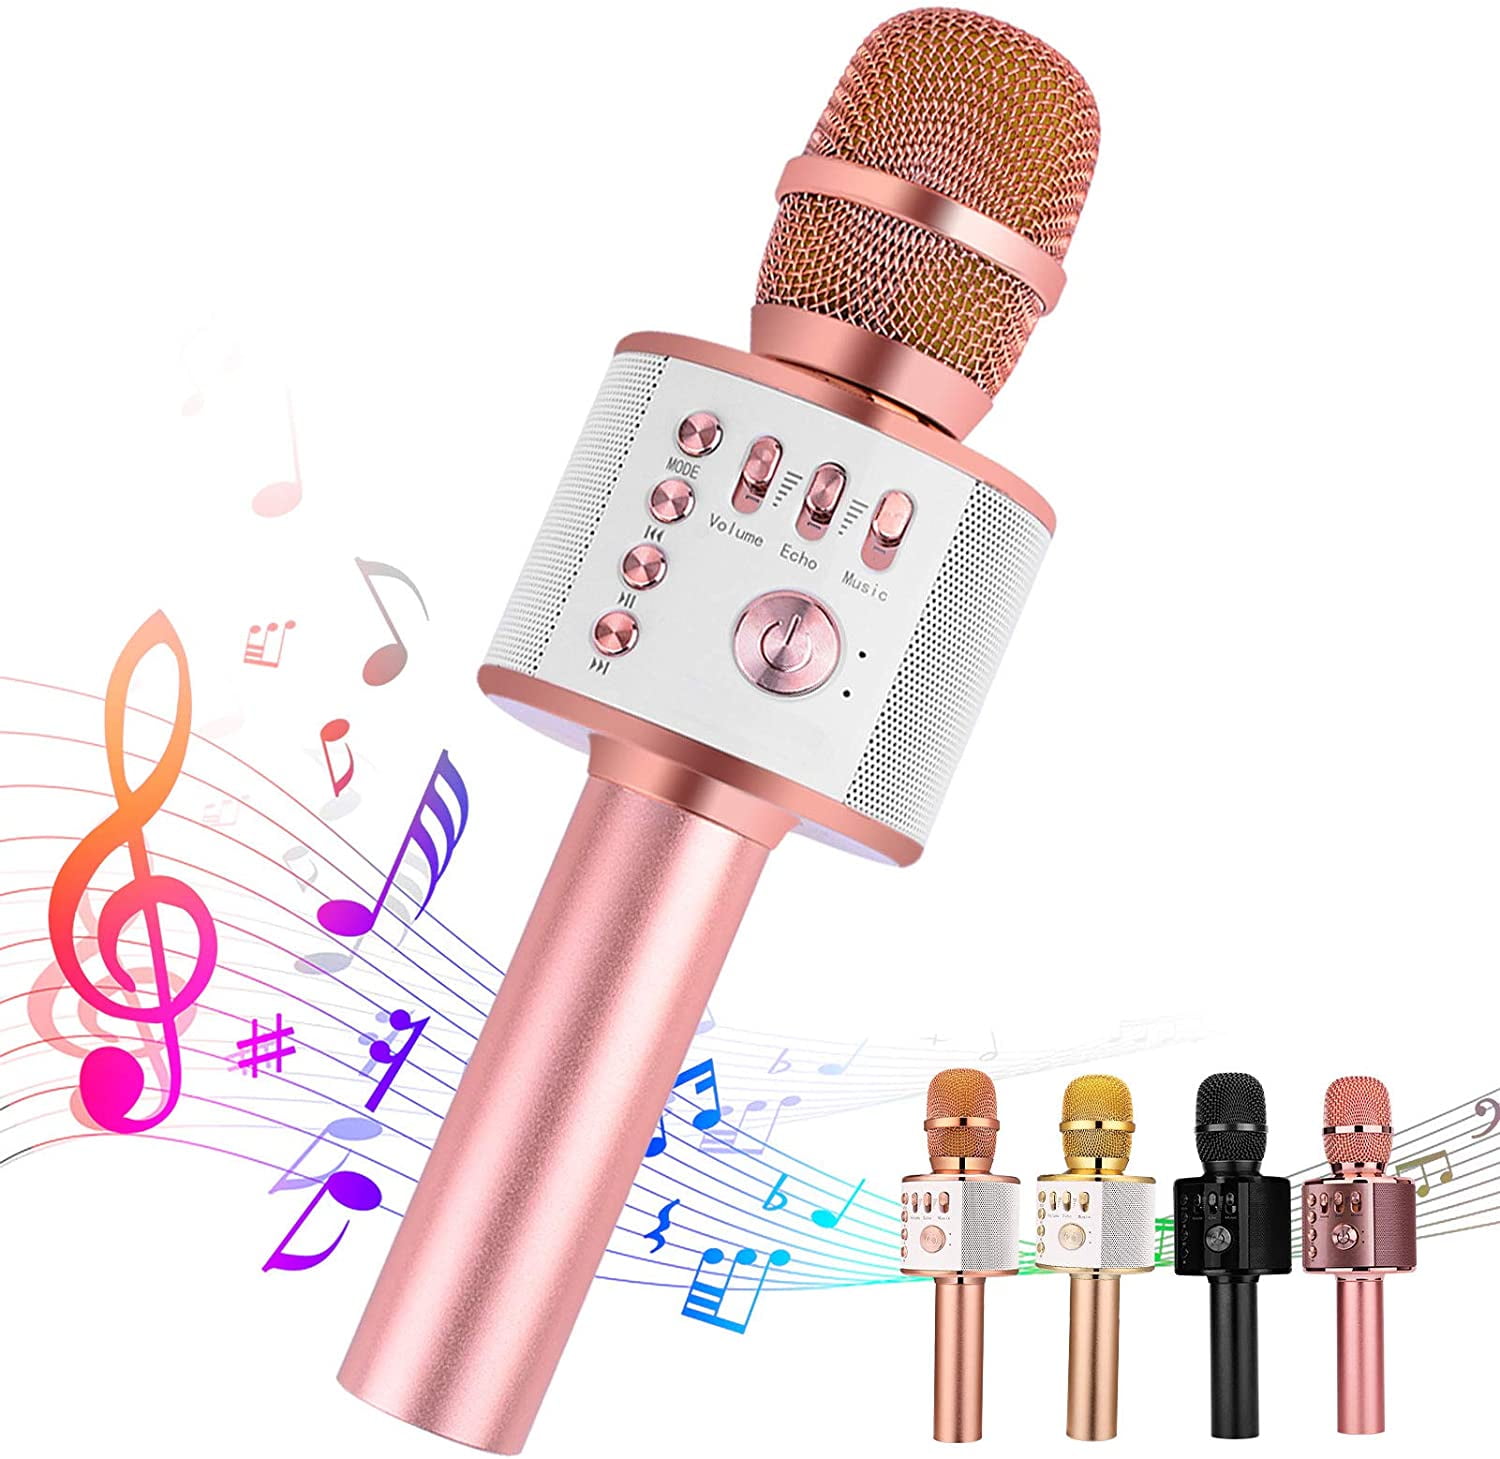 Rose Gold Wireless Microphone Karaoke 3rd Generation VERKB Rainbow Mic 3-in-1 Bluetooth Karaoke Machine KTV for Apple iPhone Android Smartphone and Pc 